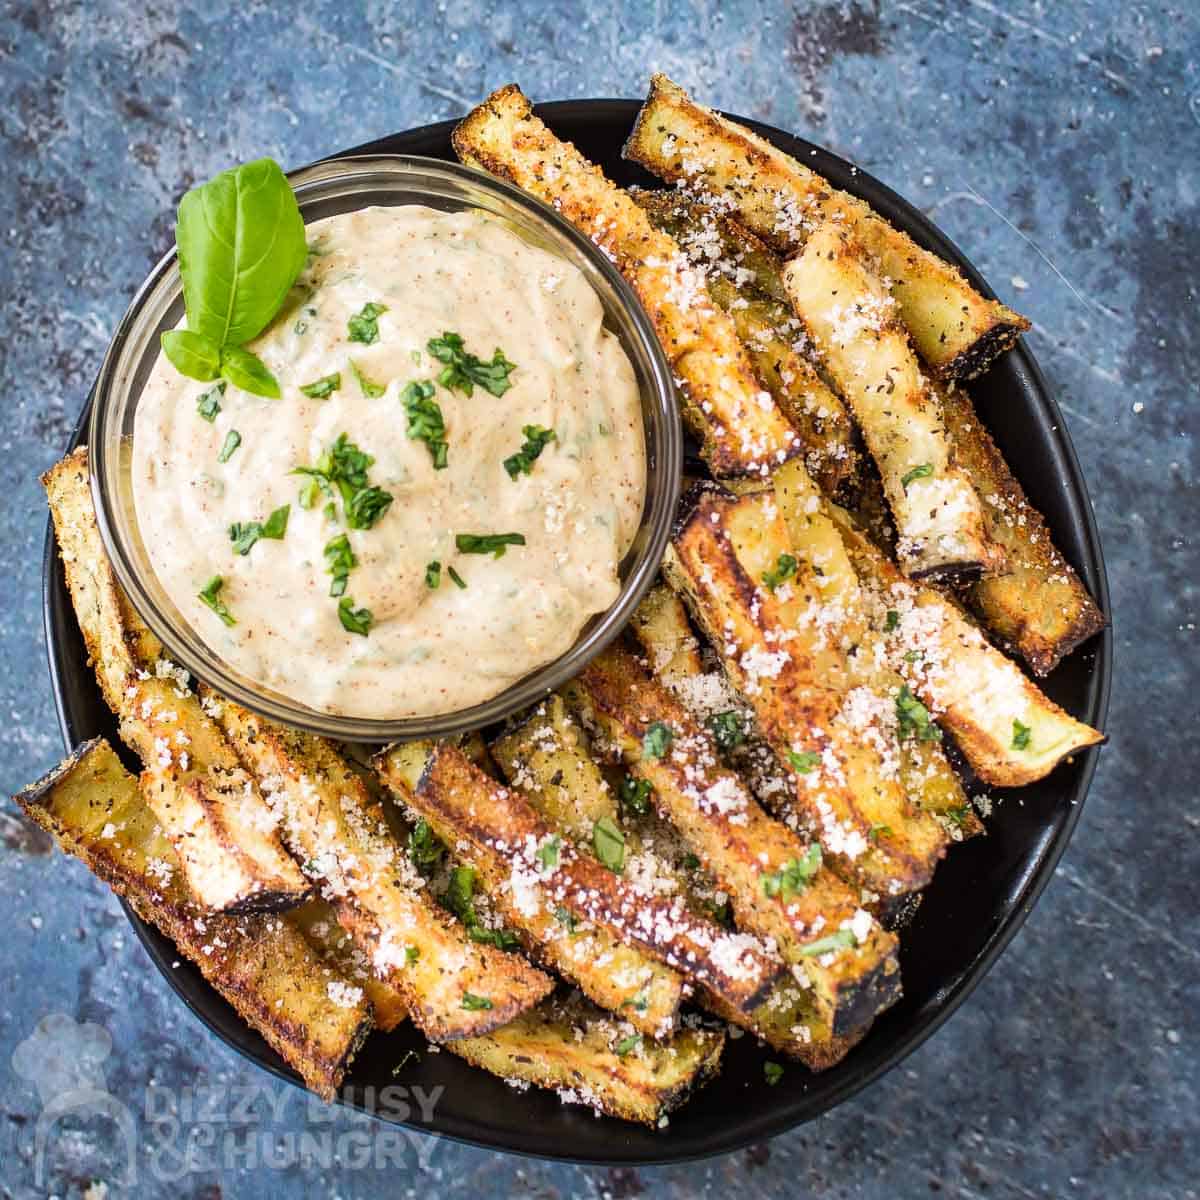 Overhead shot of eggplant fries garnished with basil and parmesan on a black plate with a clear bowl of chipotle basil dip garnished with more fresh basil.